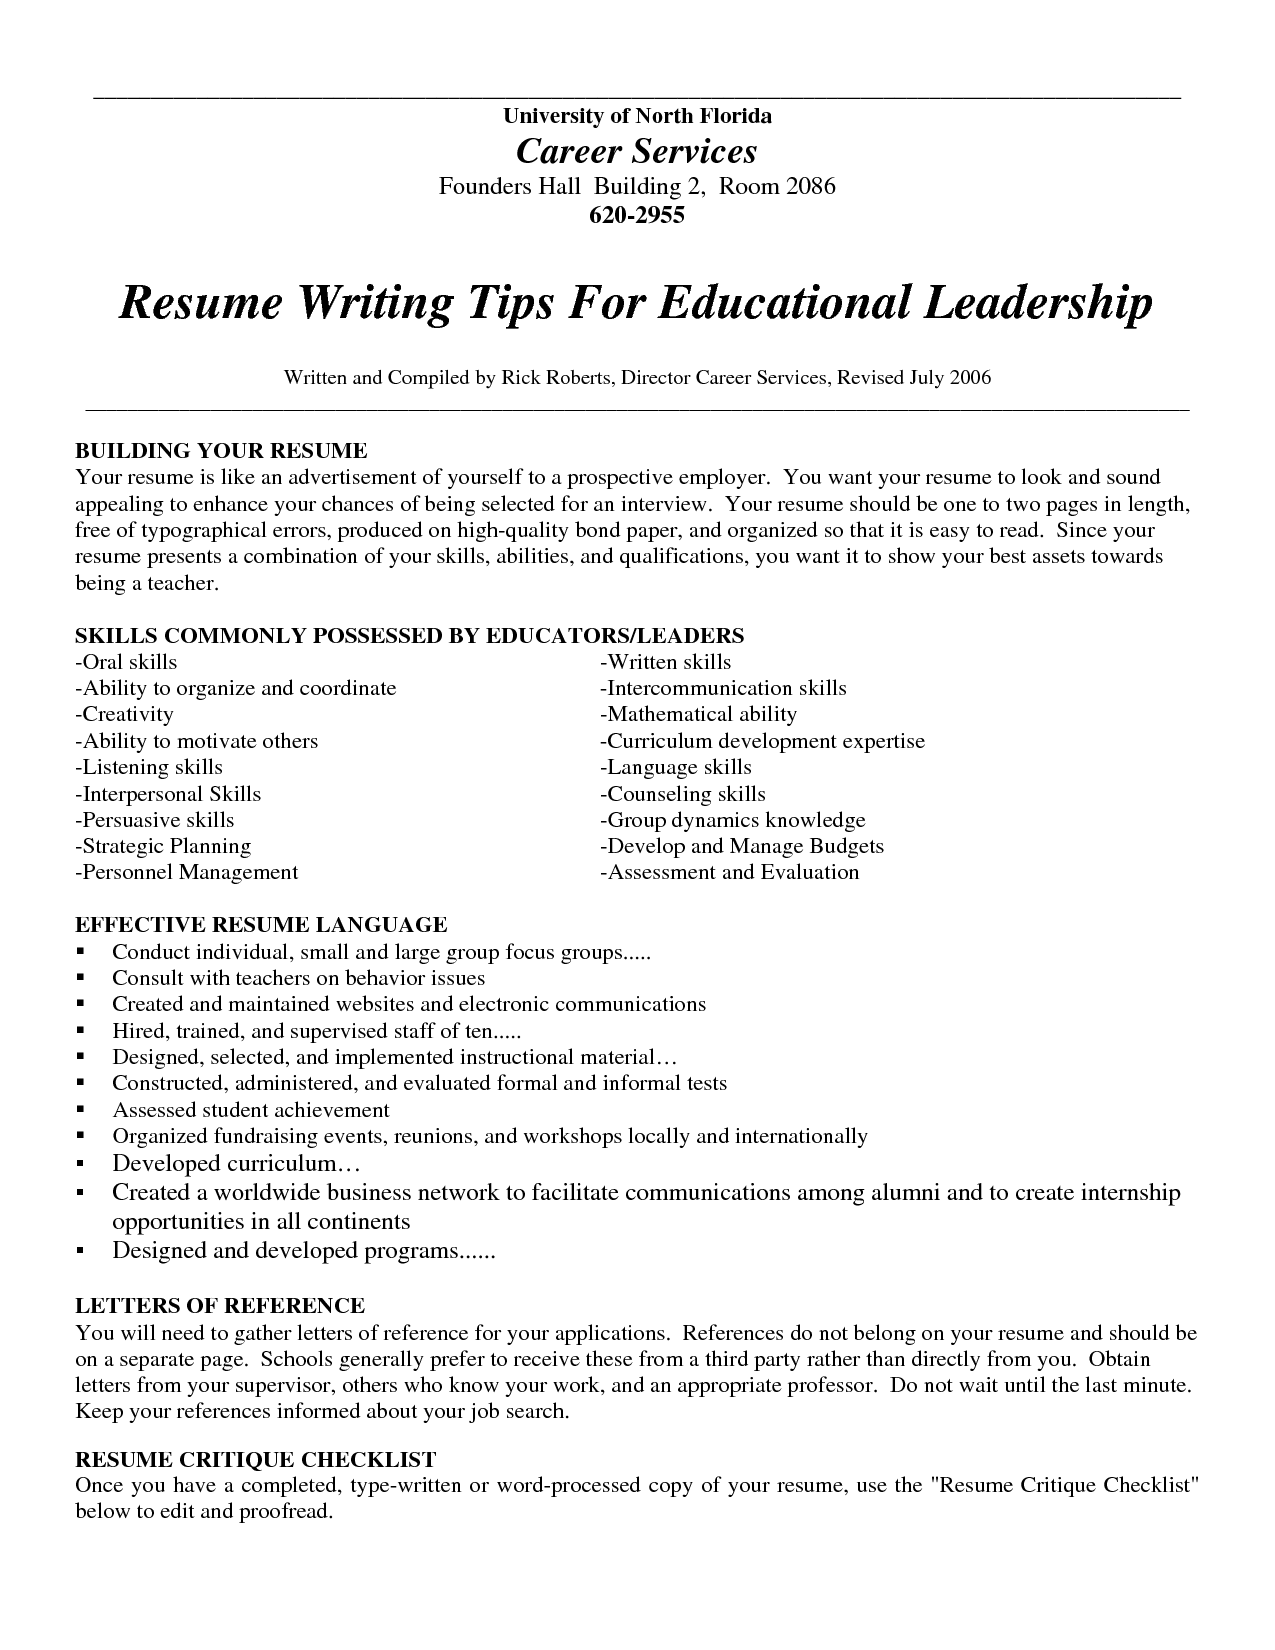 Professional resume writing services 2012